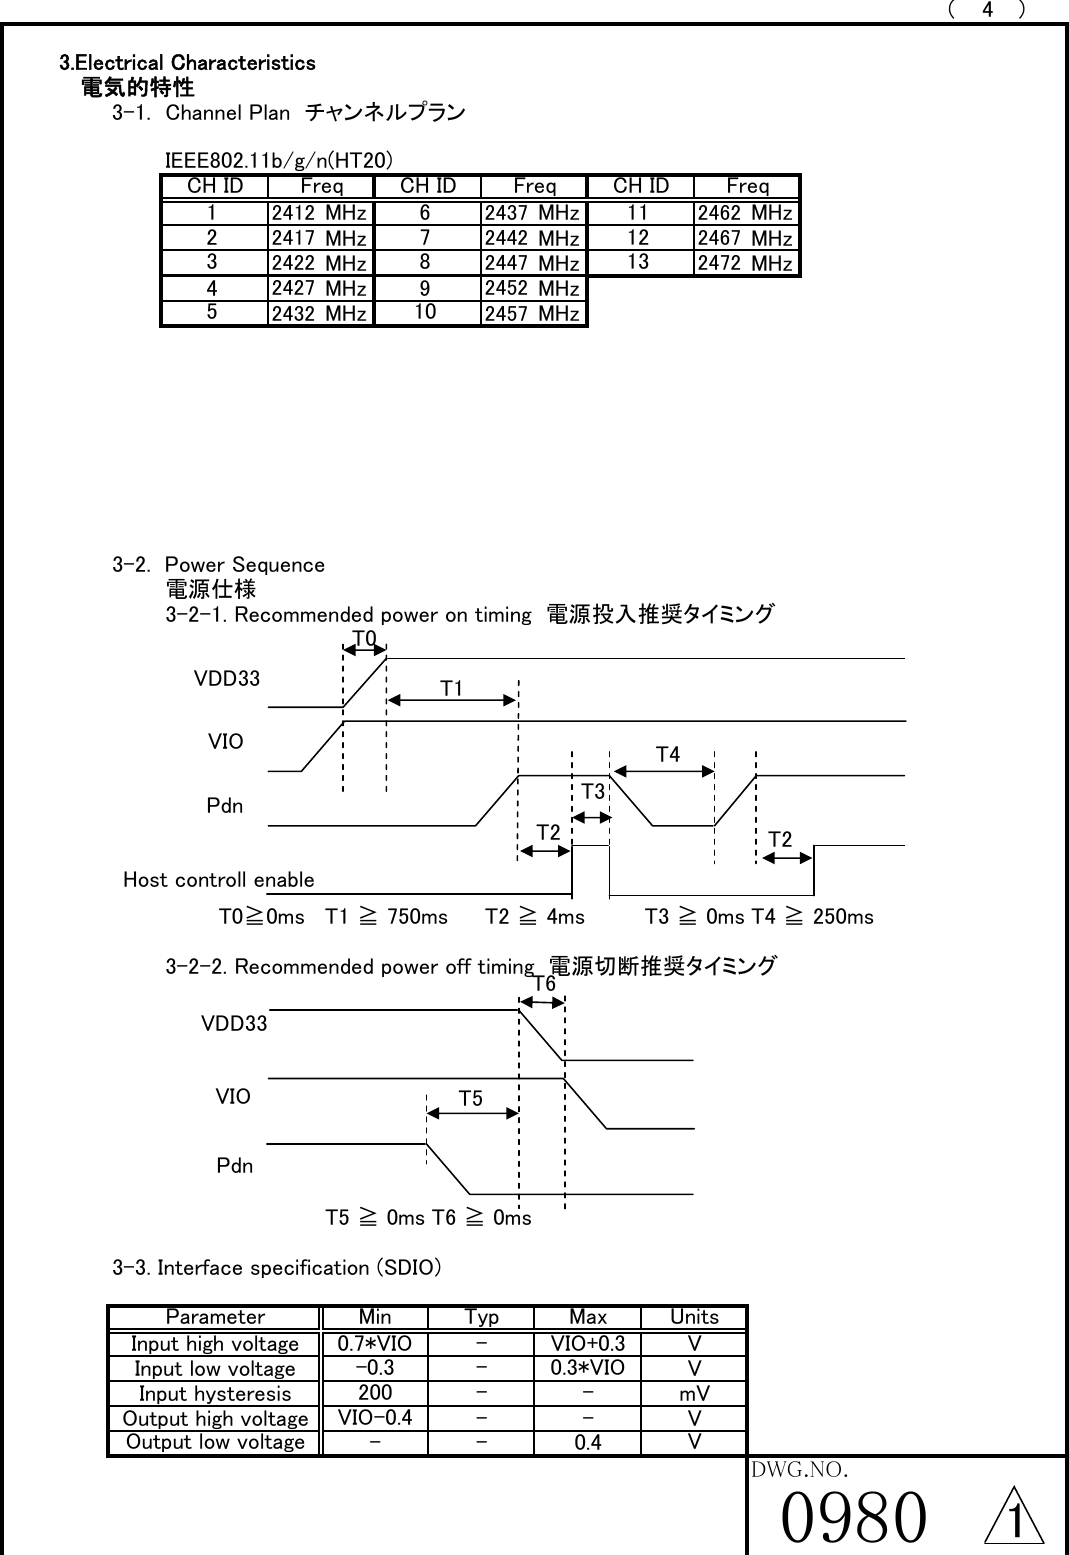 （4）3.Electrical Characteristics   電気的特性3-1. Channel Plan  チャンネルプランIEEE802.11b/g/n(HT20)2412 MHz 2437 MHz 2462 MHz2417 MHz 2442 MHz 2467 MHz2422 MHz 2447 MHz 2472 MHz2427 MHz 2452 MHz2432 MHz 2457 MHz3-2.  Power Sequence電源仕様3-2-1. Recommended power on timing  電源投入推奨タイミングT0≧0ms T1 ≧ 750ms T2 ≧ 4ms T3 ≧ 0ms T4 ≧ 250ms3-2-2. Recommended power off timing  電源切断推奨タイミングT5 ≧ 0ms T6 ≧ 0ms3-3. Interface specification (SDIO)ＭＩＴＳＵＭＩ　ＥＬＥＣＴＲＩＣ　ＣＯ．，ＬＴＤ．ParameterCH ID Freq53412V-0.4UnitsmV0.3*VIO V-V111210Min69Max13CH ID-VCH ID78VIO+0.3FreqTypFreqInput high voltage 0.7*VIO-Input low voltage -0.3-Input hysteresisDWG.NO.0980Output low voltage -200--VIO-0.4Output high voltageVDD33VIOVDD33VIOPdnPdnT5Host controll enableT2 T2T3T1T4T0T61